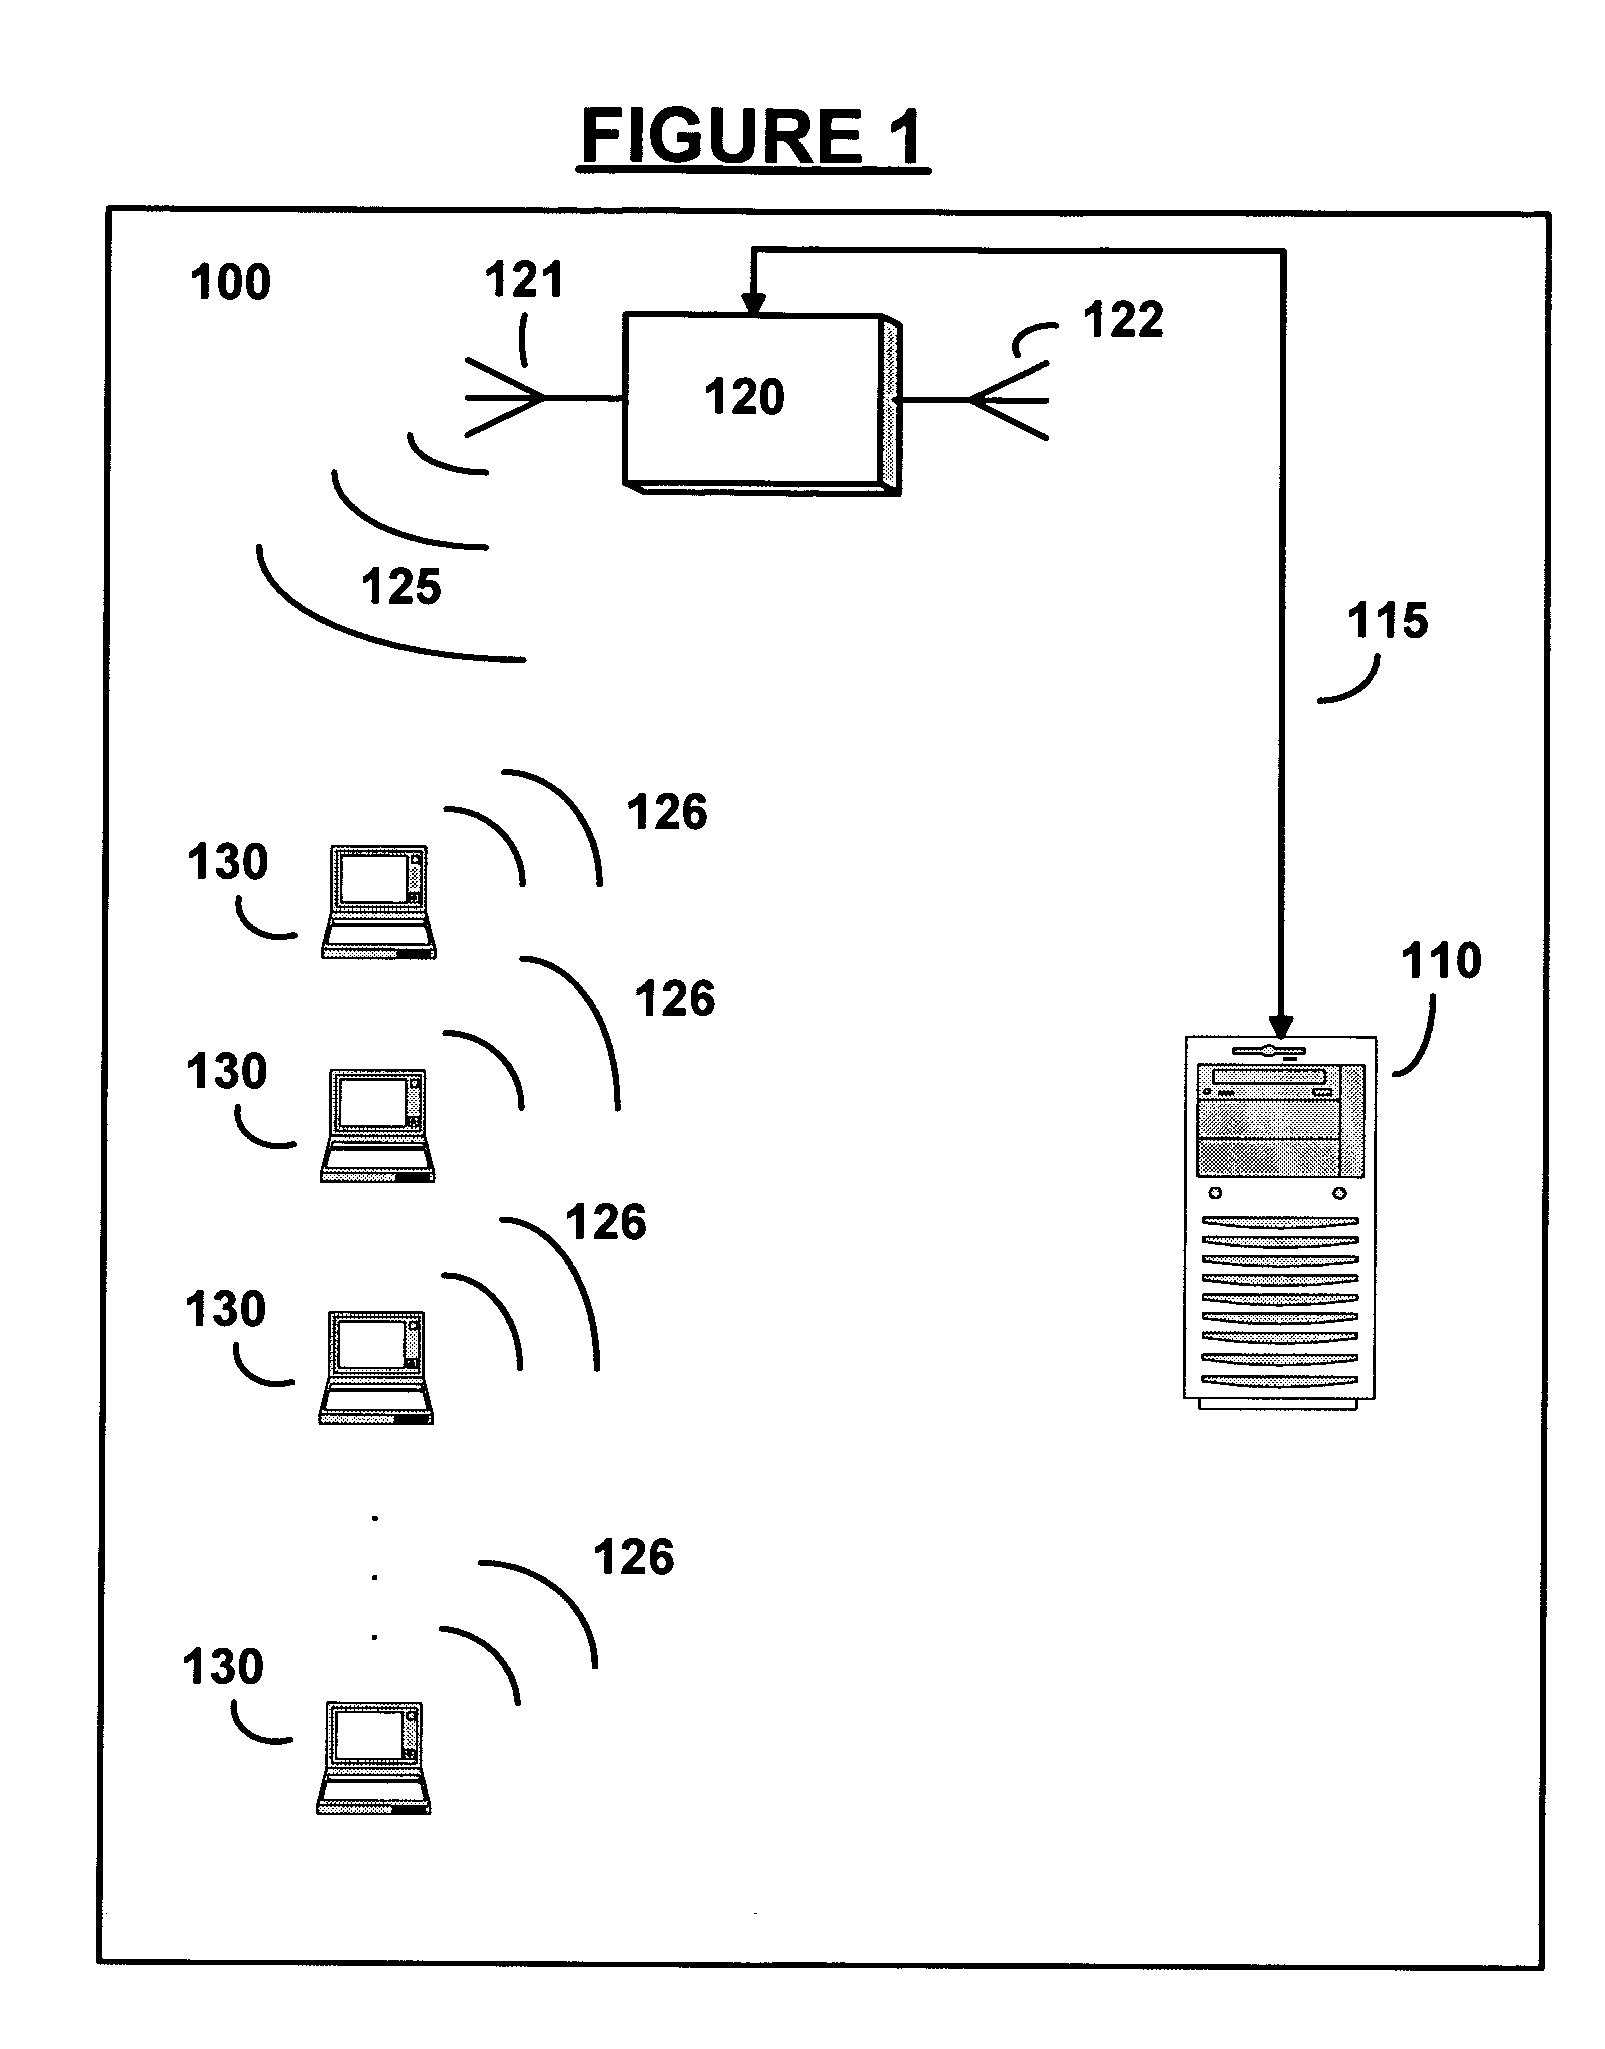 Systems and methods for waking up wireless LAN devices